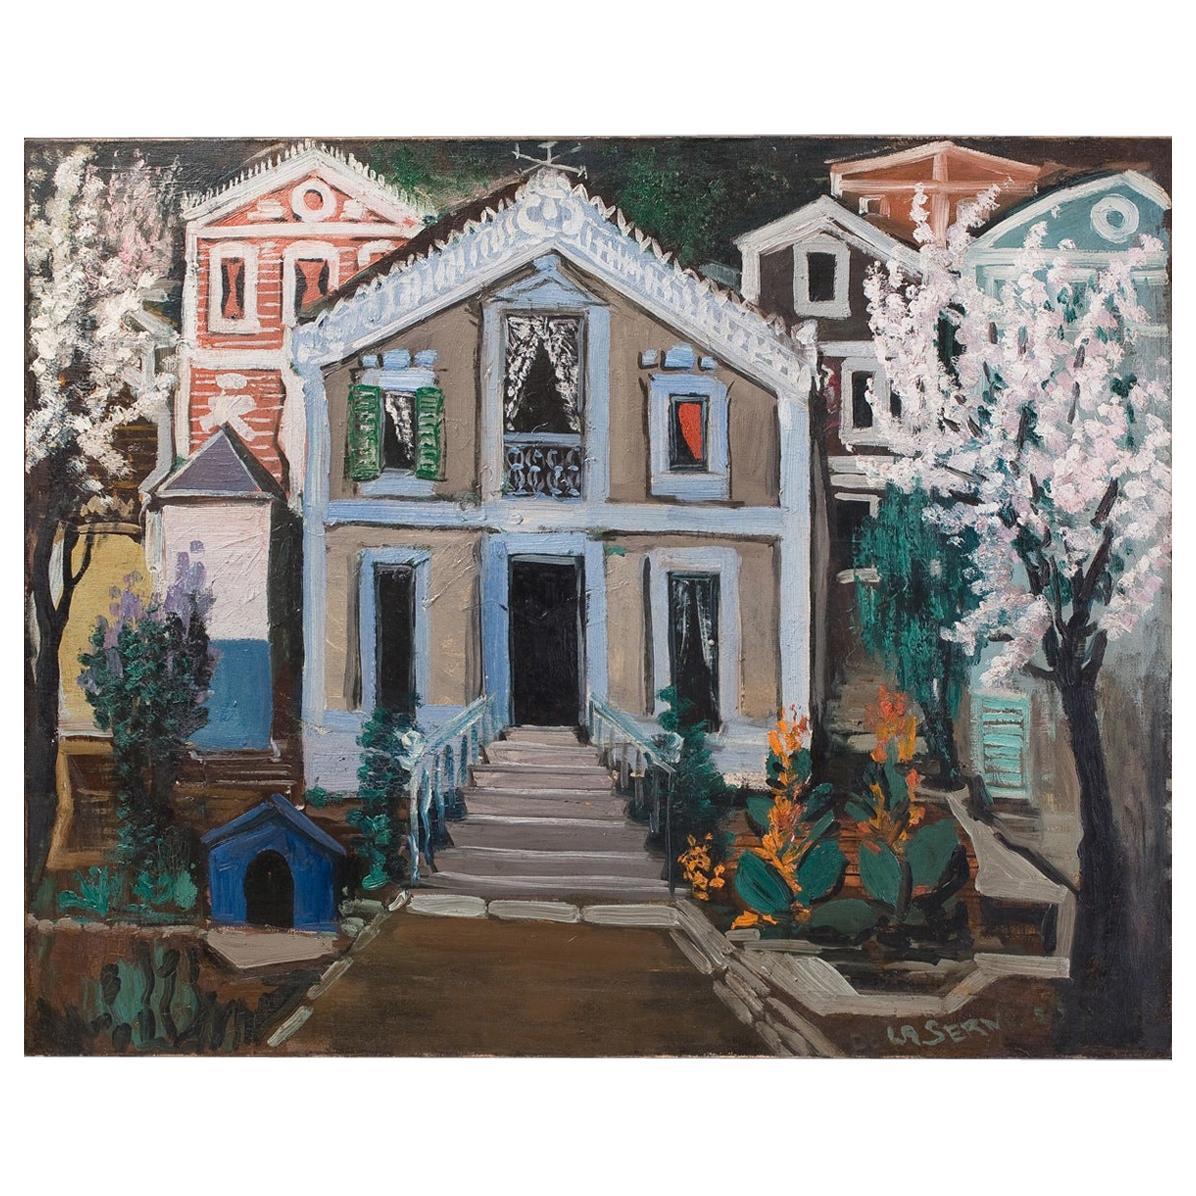 Ismael de la Serna ''The House'' Signed and Dated 1929